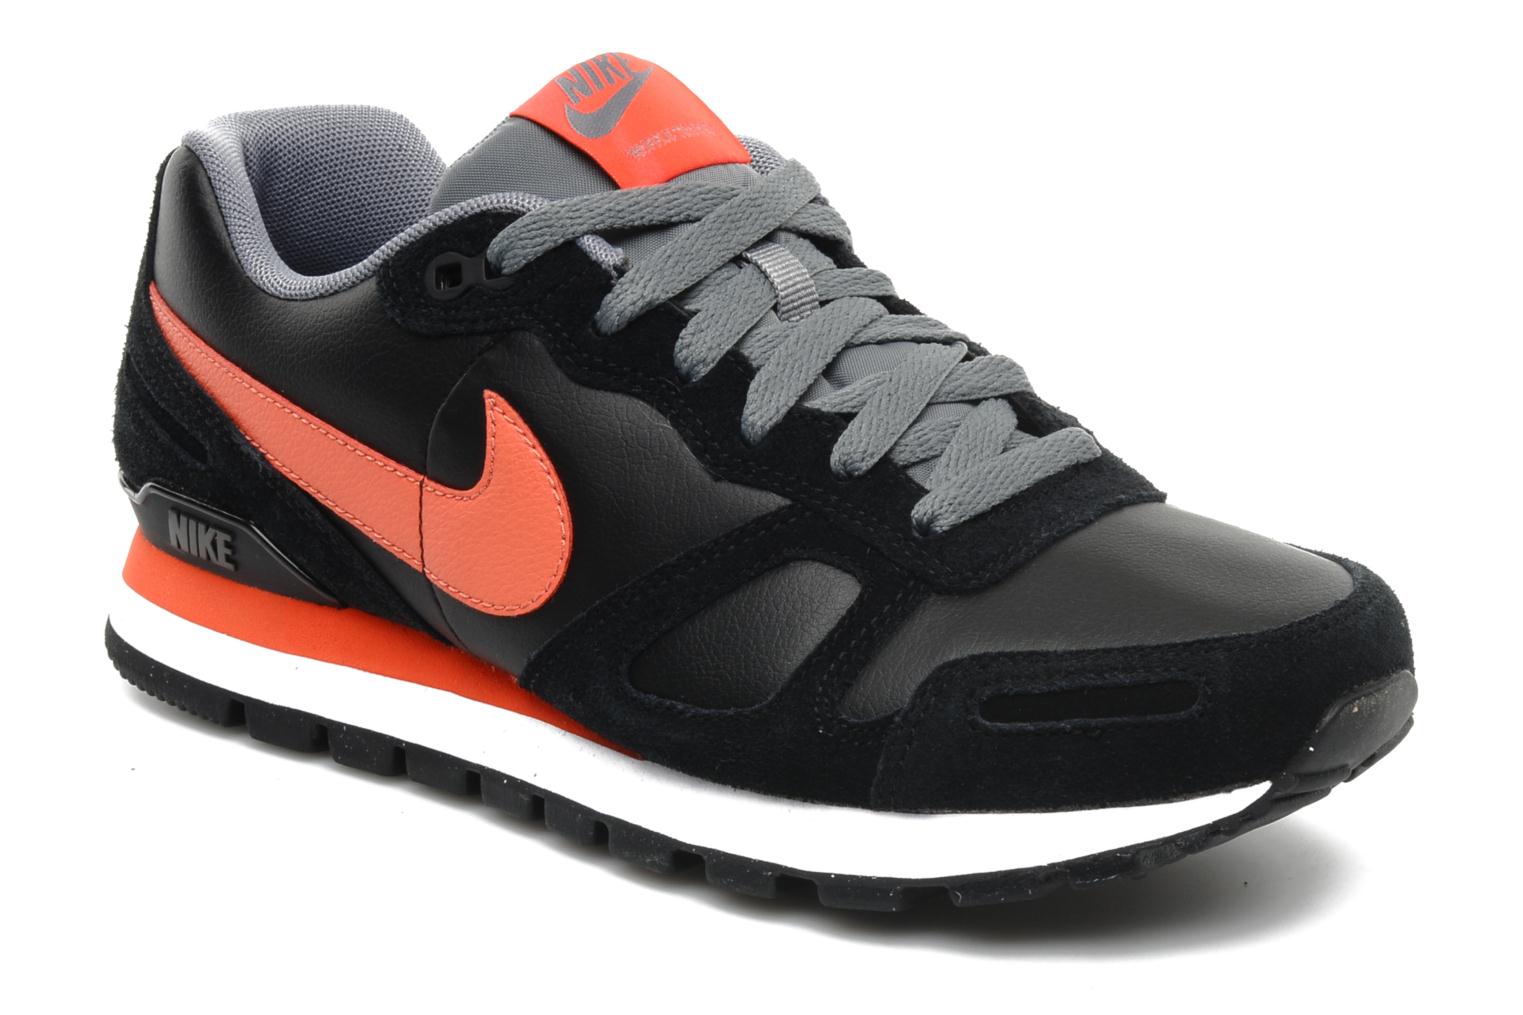 Foto Tenis moda Nike Air waffle trainer leather Hombre foto 47805